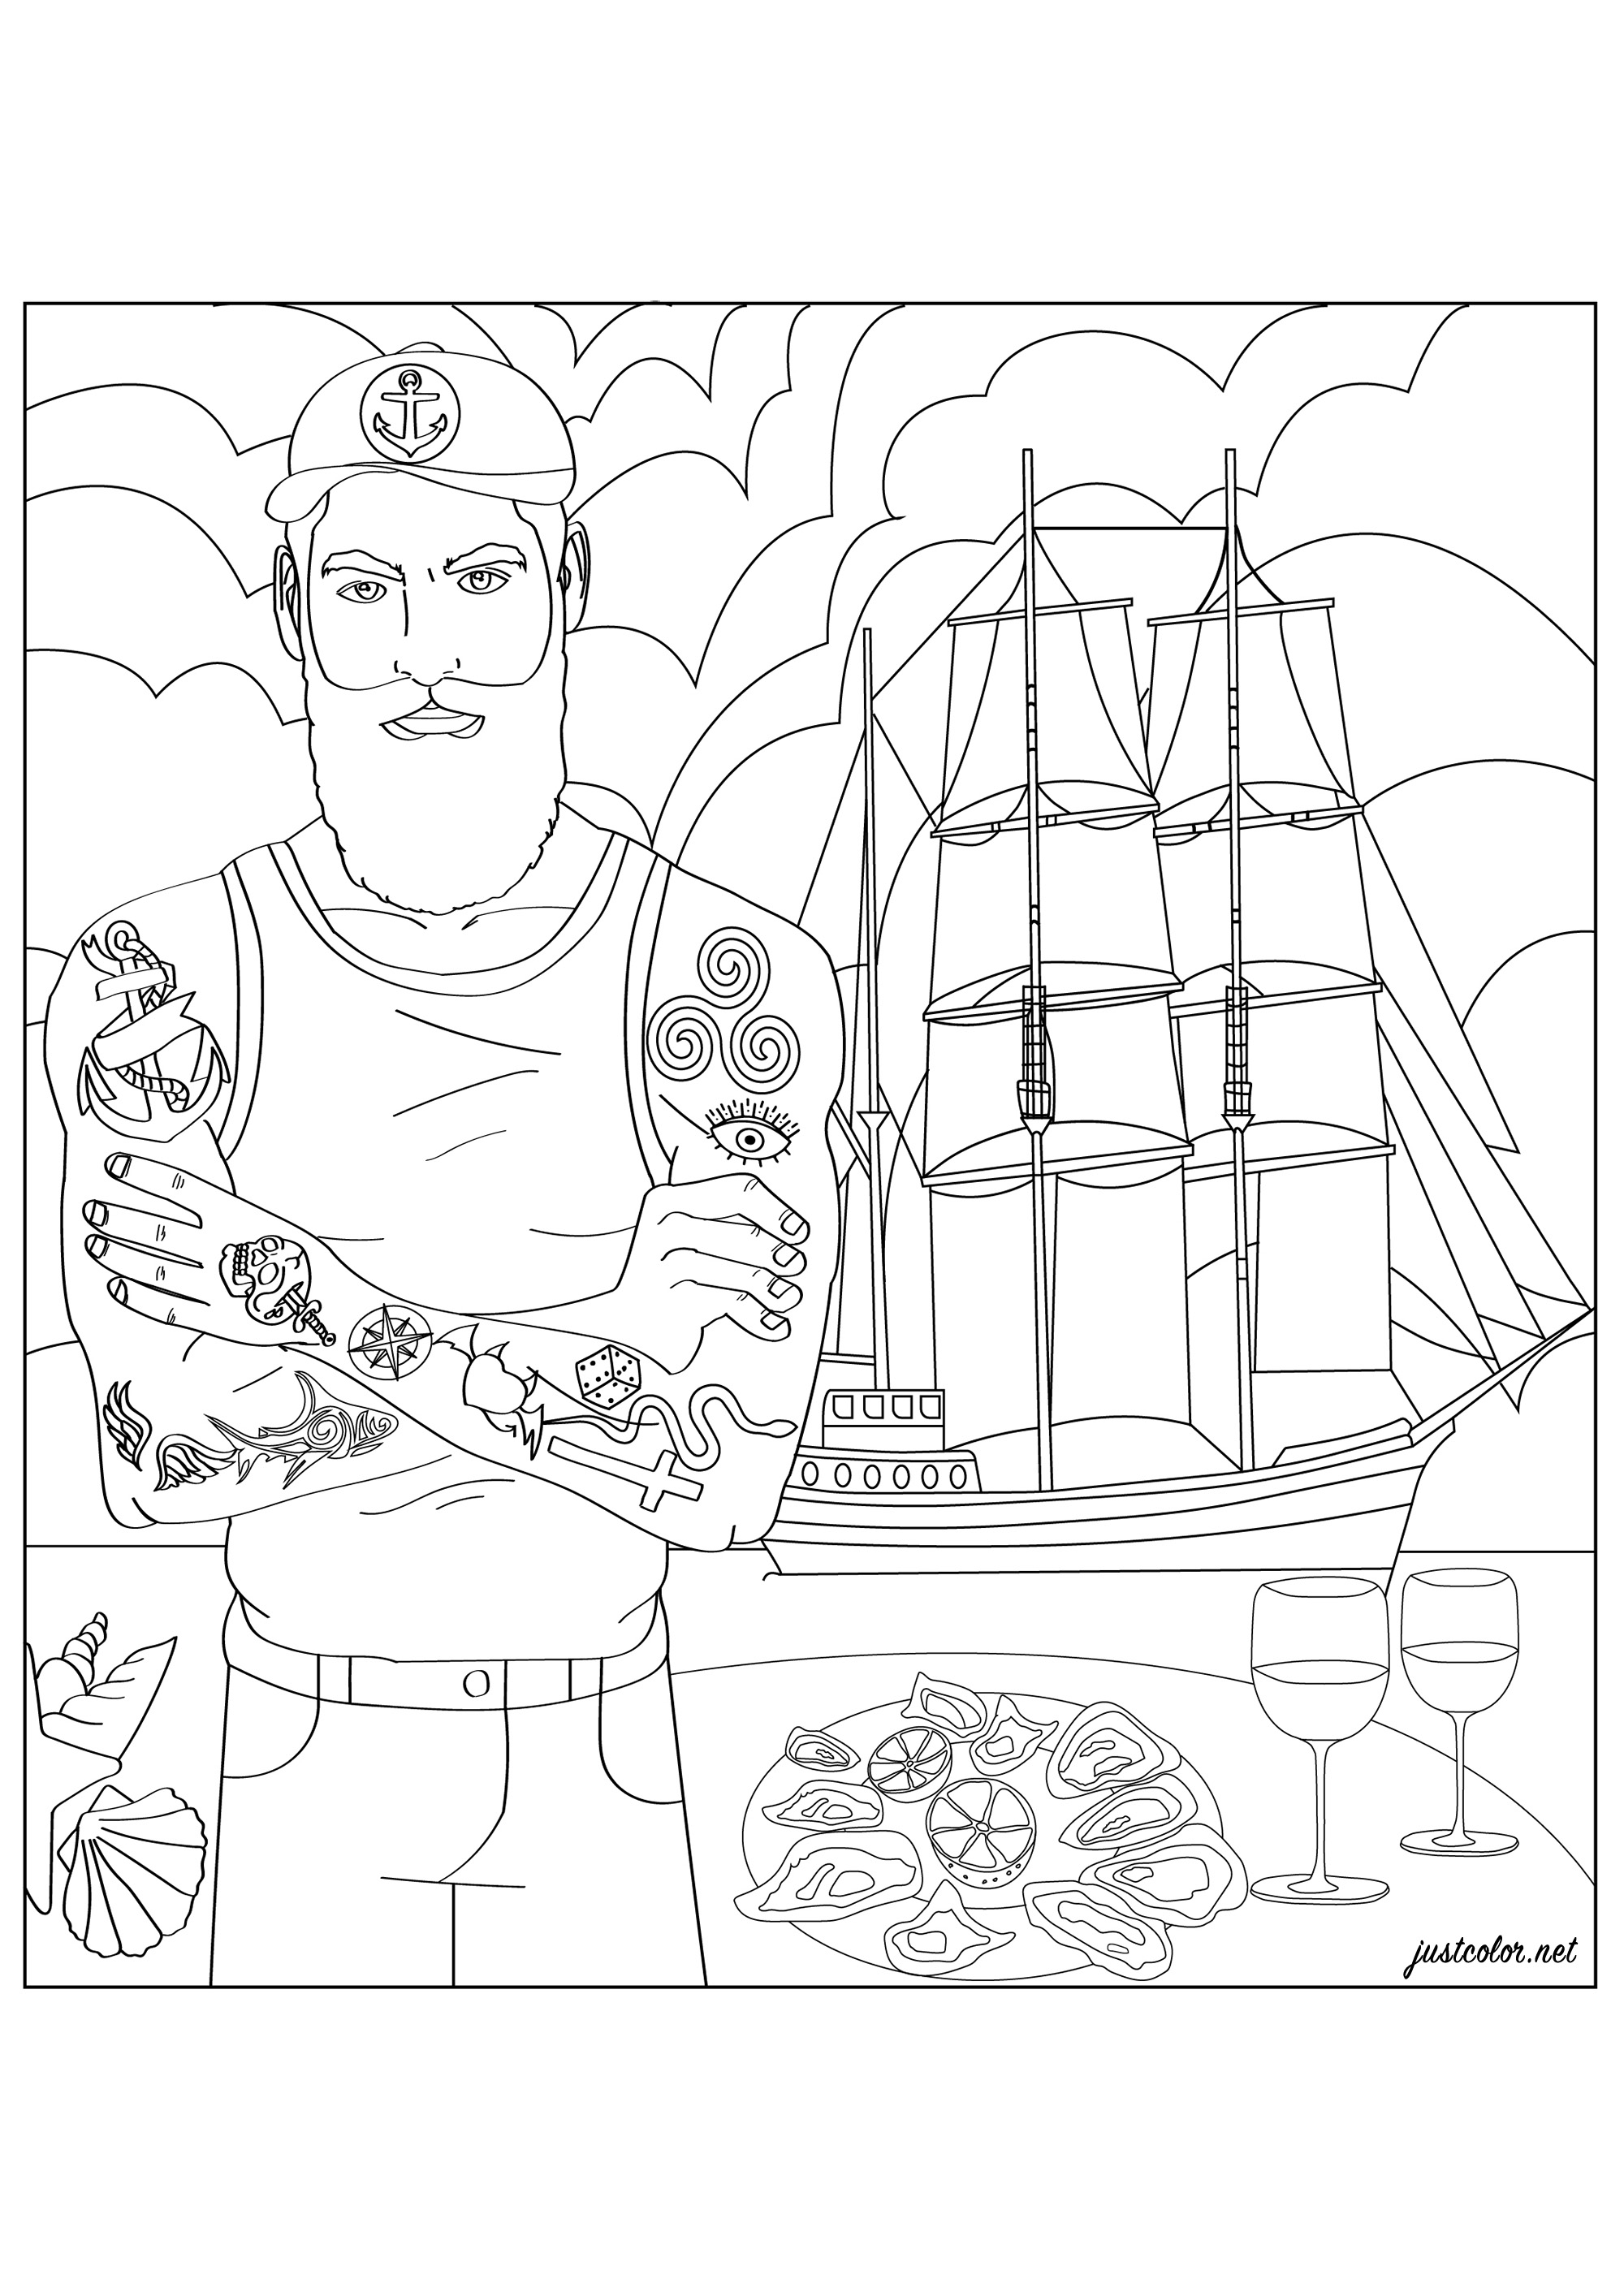 'Hipster' sailor showing his tattoos, by the sea with a 3-masted sailboat in the background.  Ready to eat a plate of oysters while drinking wine (in moderation)